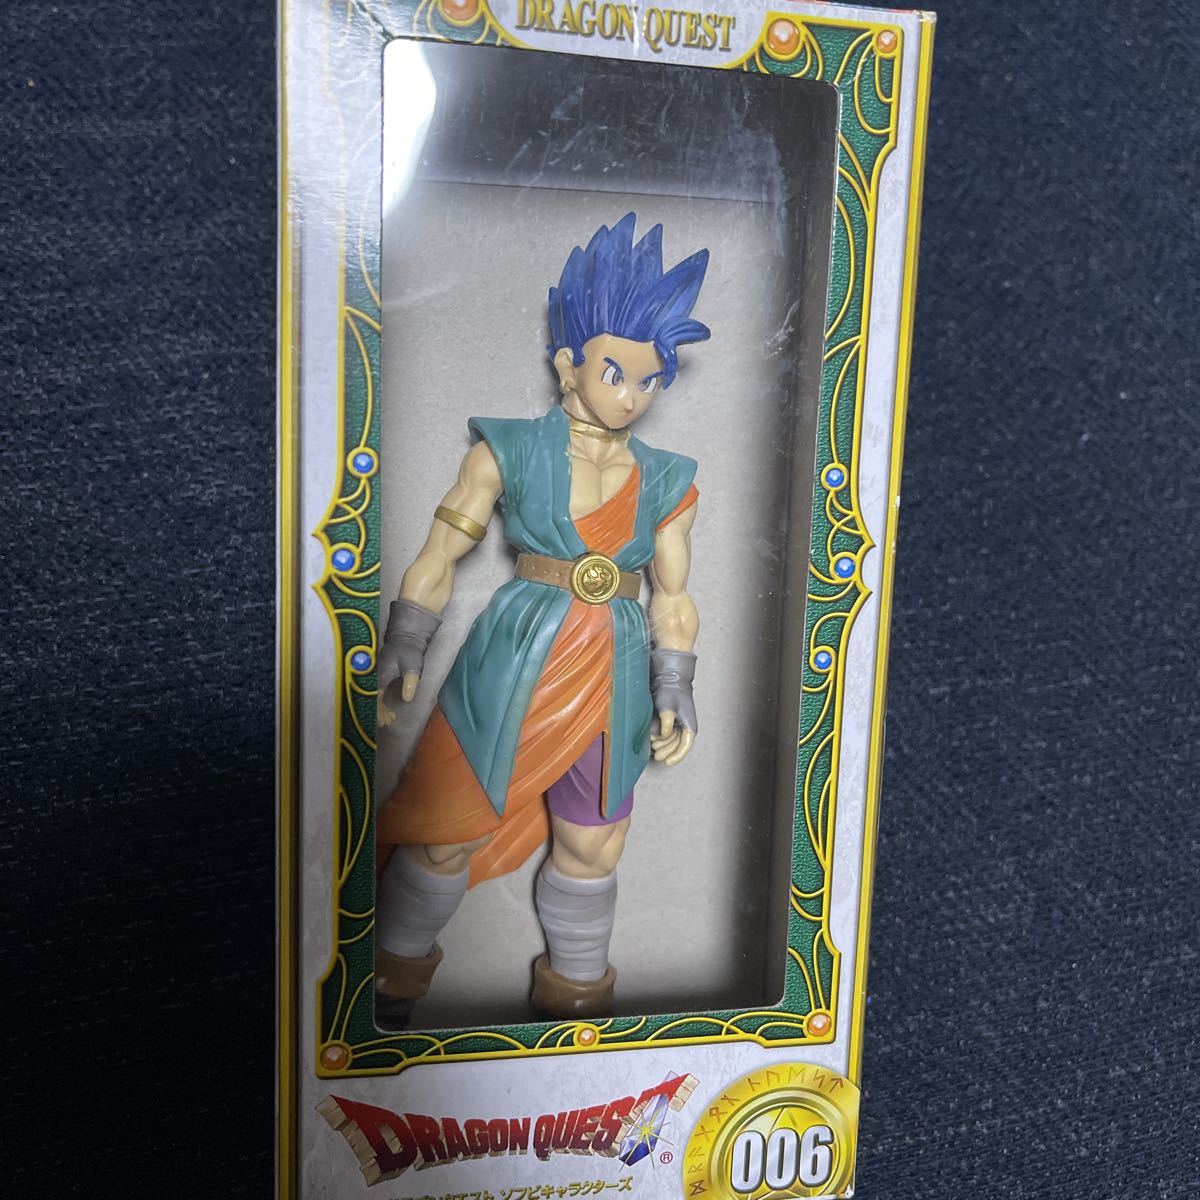  Dragon Quest sofvi character z001~006 all 6 kind full comp set breaking the seal settled box attaching gong ke figure item z guarantee Lee 